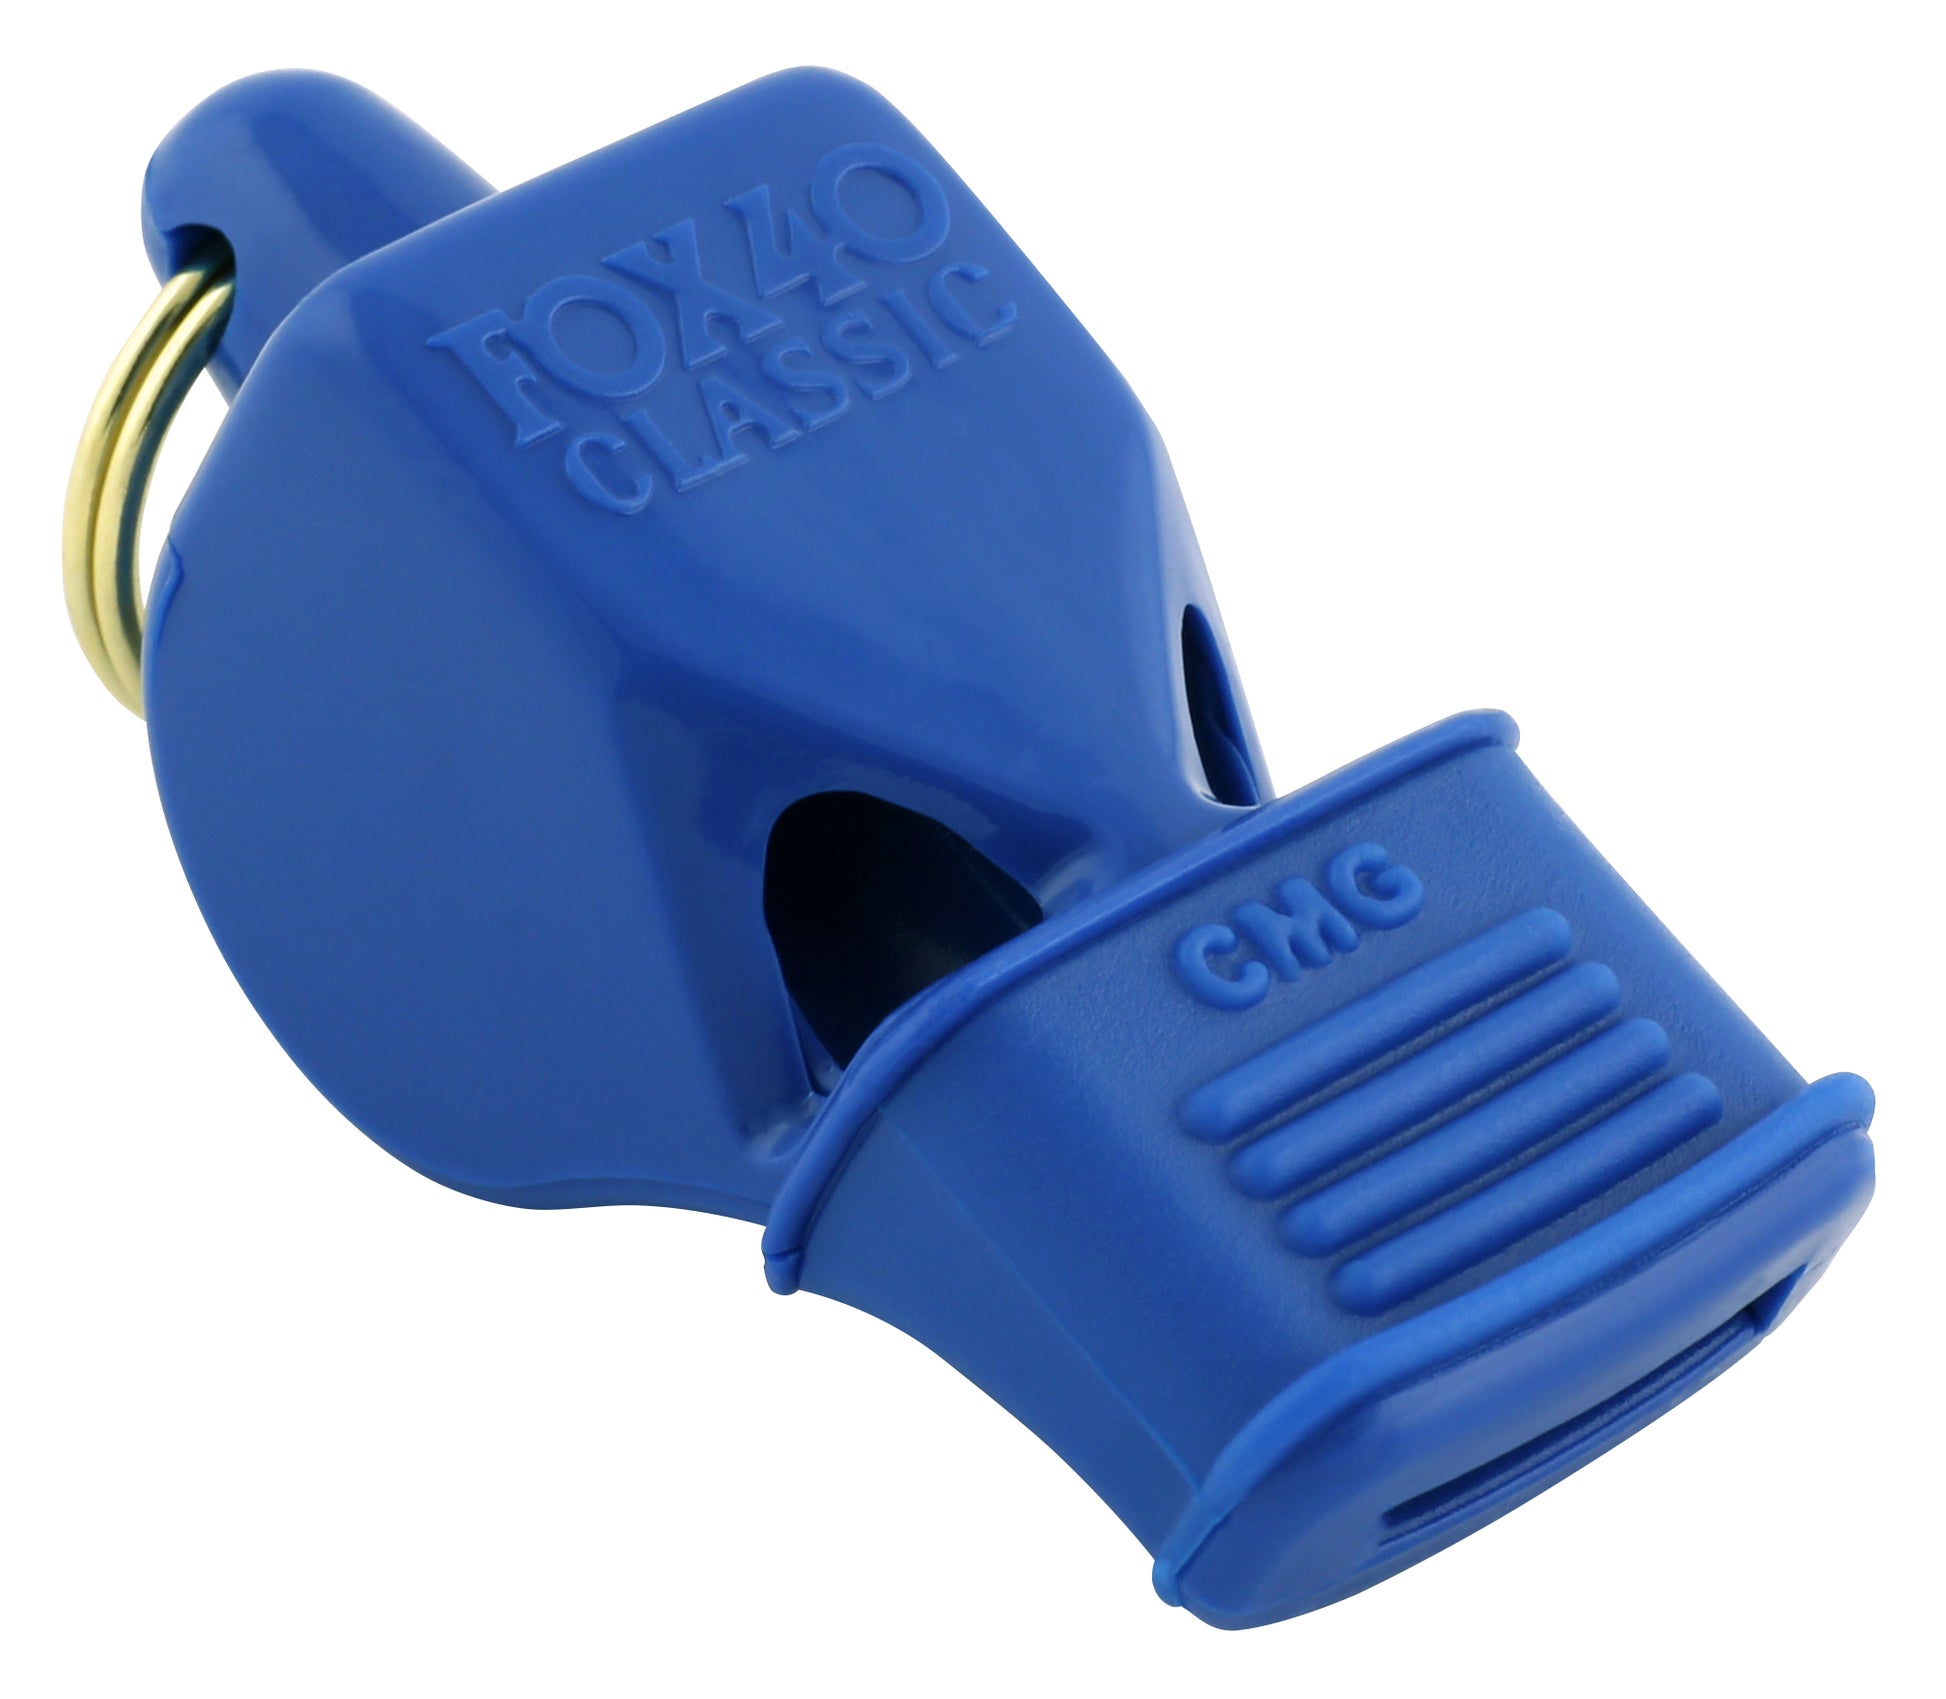 Fox 40 Whistle - Classic CMG – REFSTORE